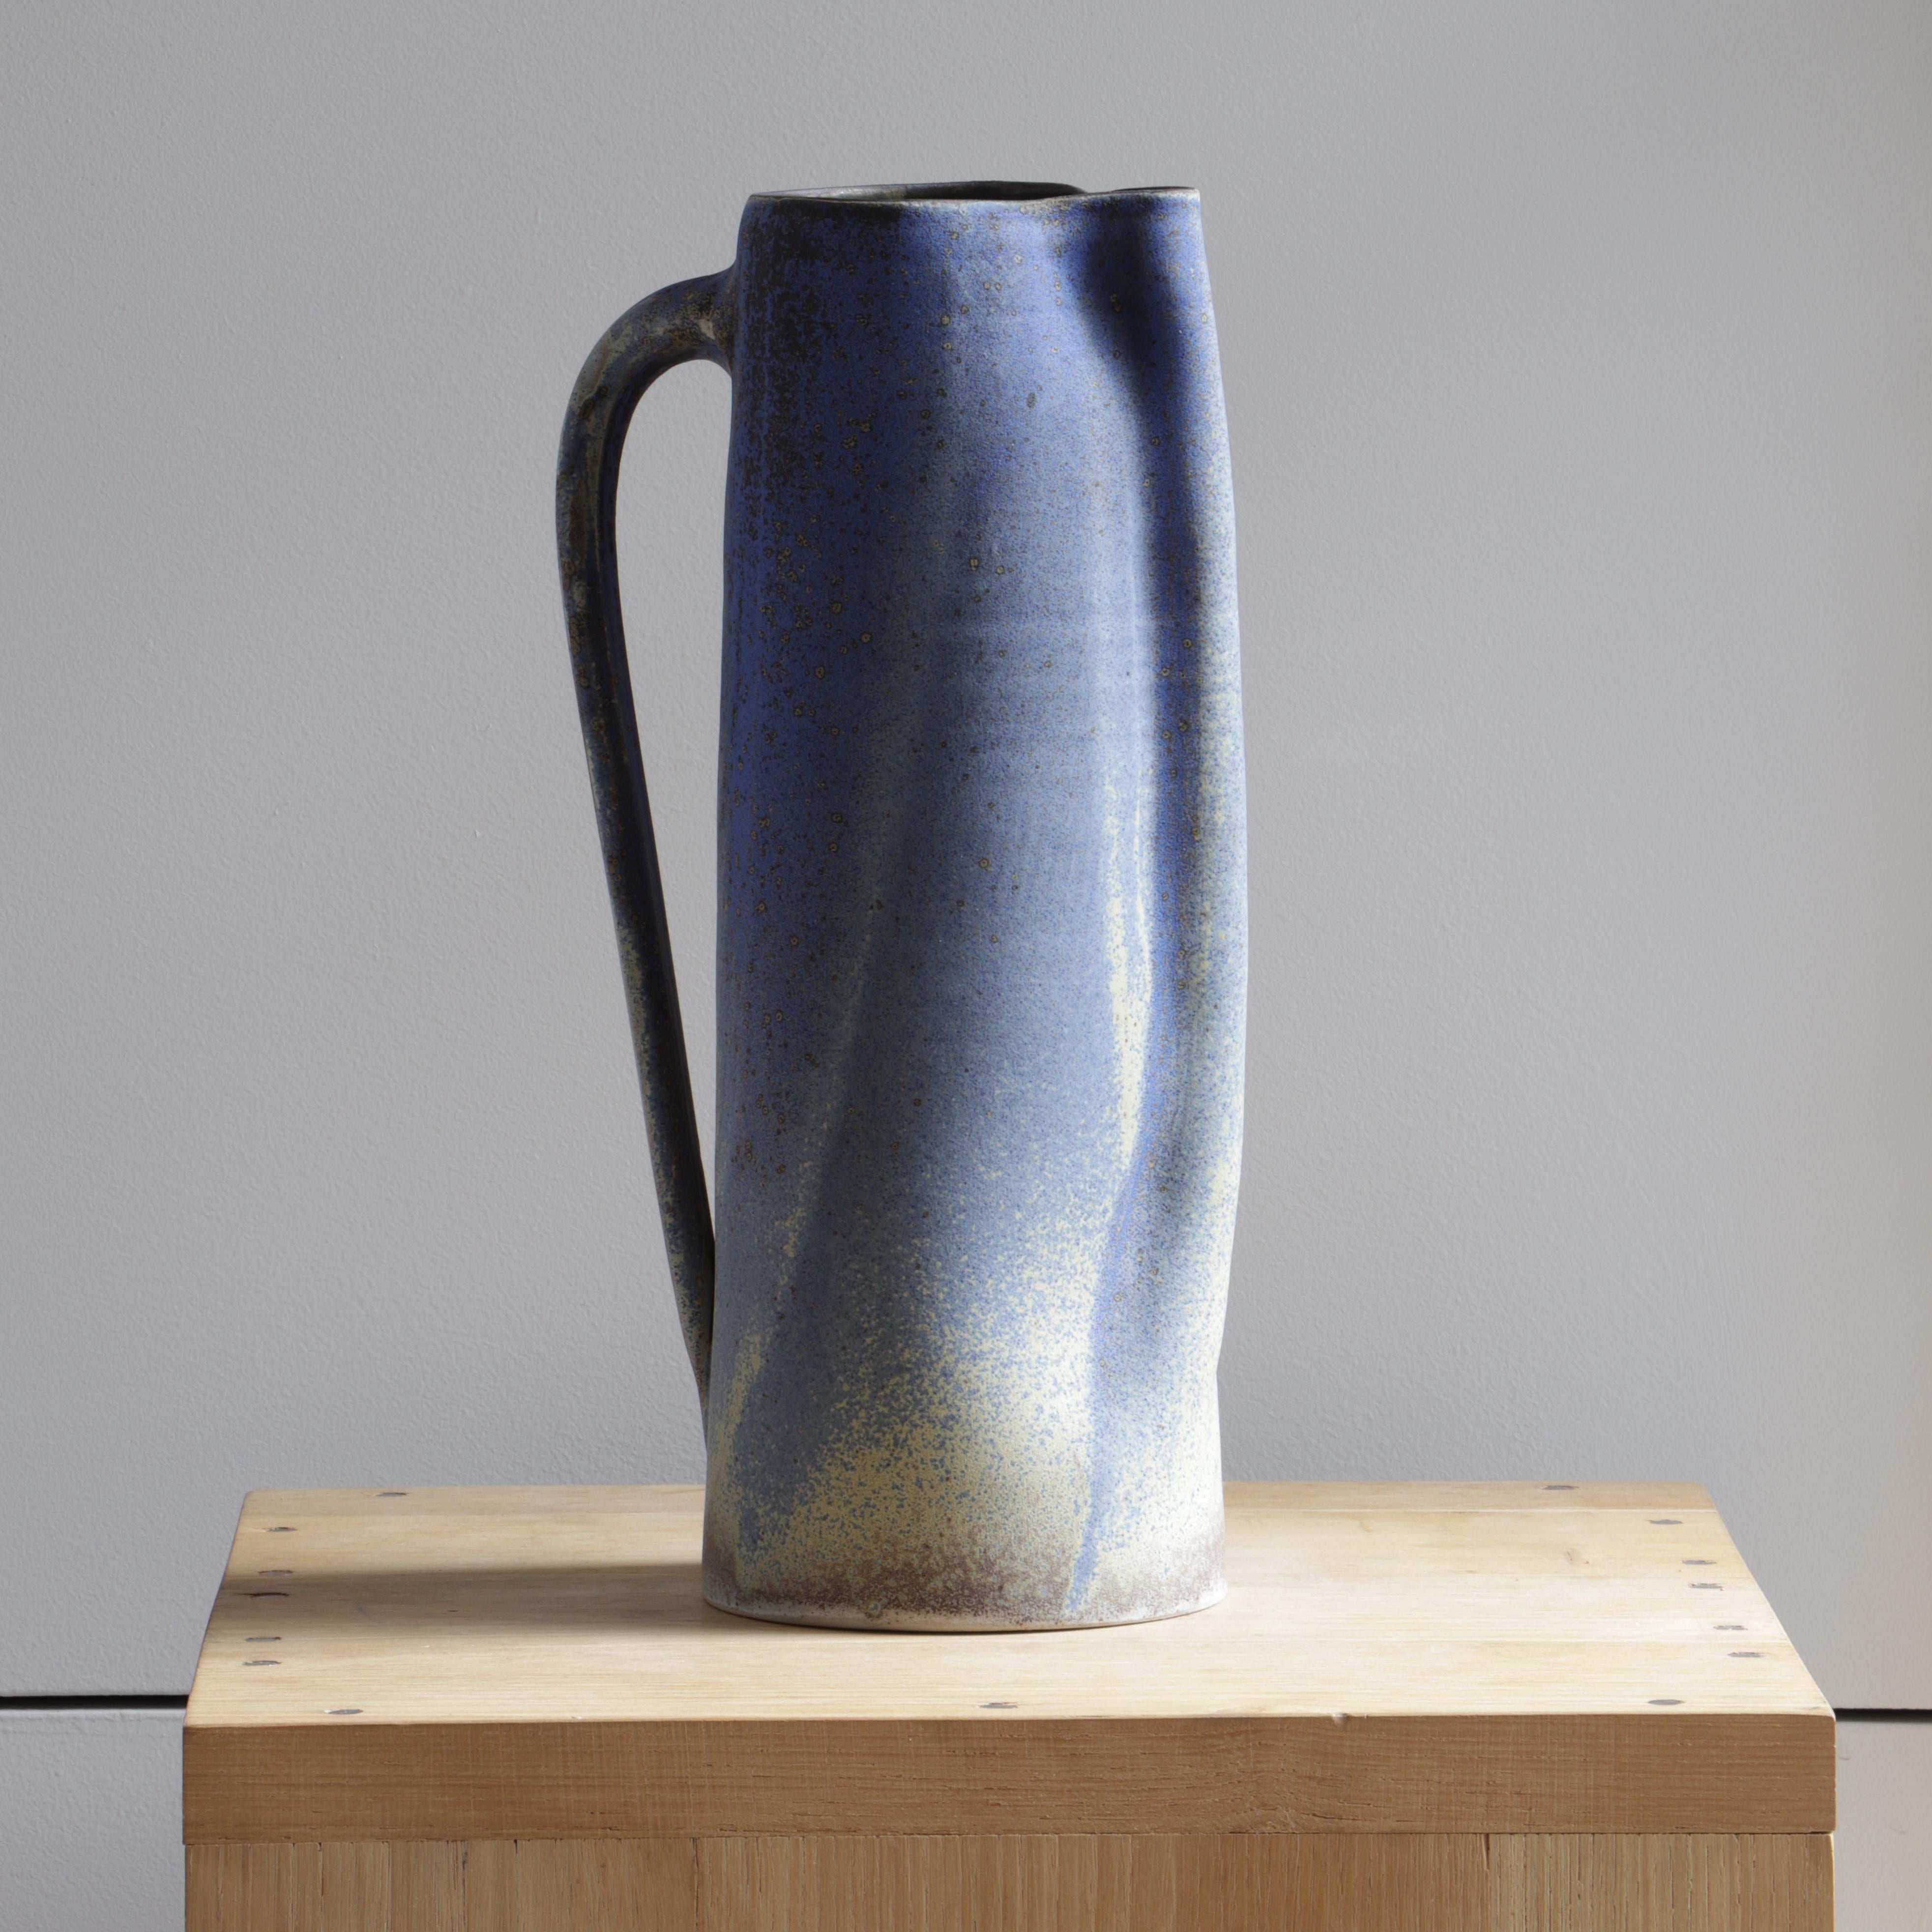 This ceramic jug was created by Ingrid Van Munster. Her works are made of porcelain sandstone. The colorization phase consists in covering her pieces with enamel, after a first firing at 1000°C. She manufactures her own matt and satin enamels in a